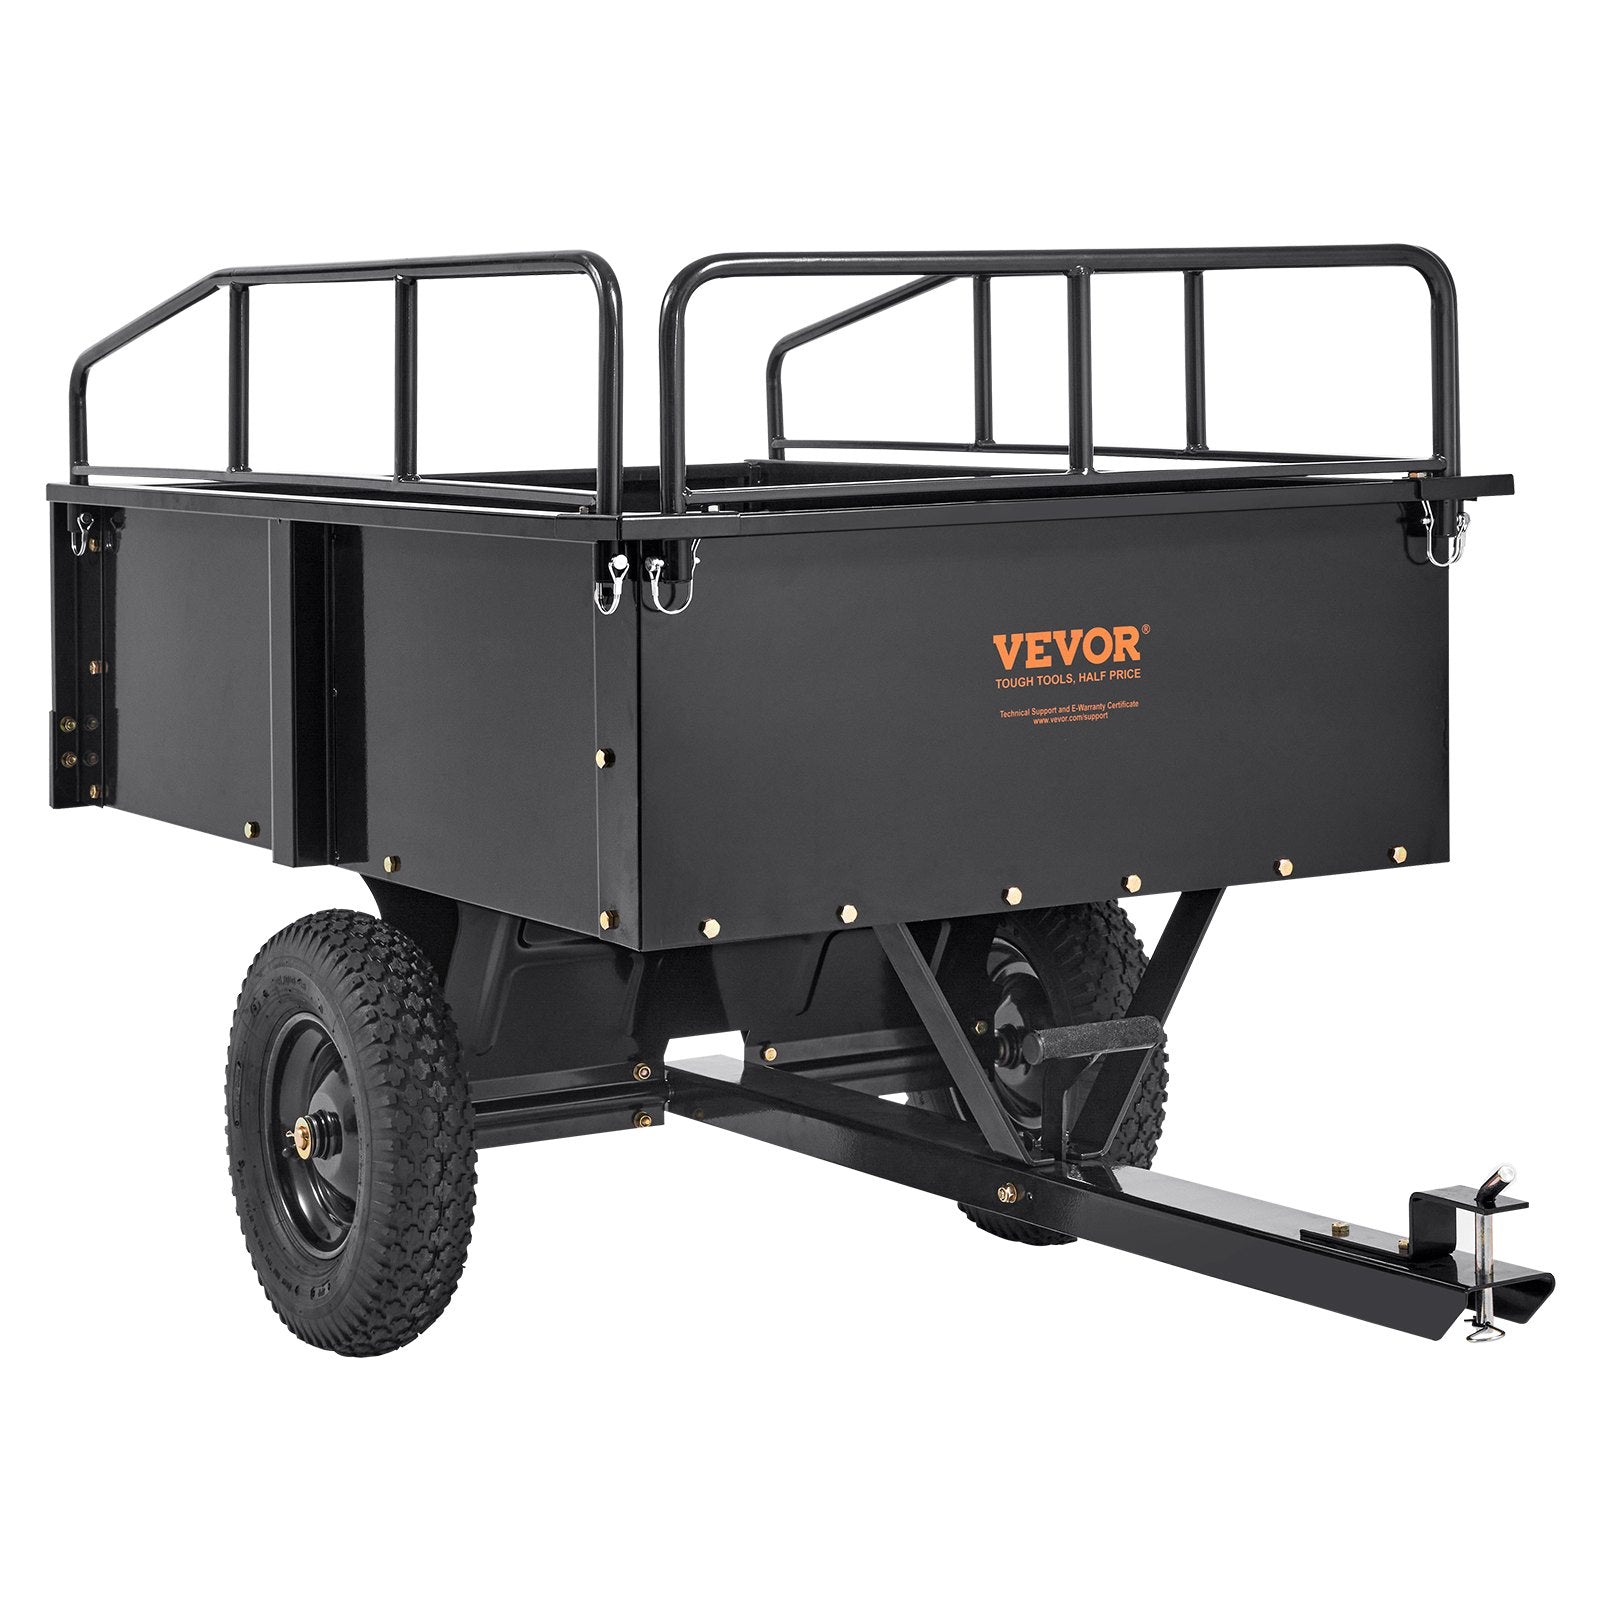 VEVOR Heavy Duty ATV Trailer Steel Dump Cart, 750-Pound 15 Cubic Feet, Garden Utility Trailer with Removable Sides for Riding Lawn Mower Tractor